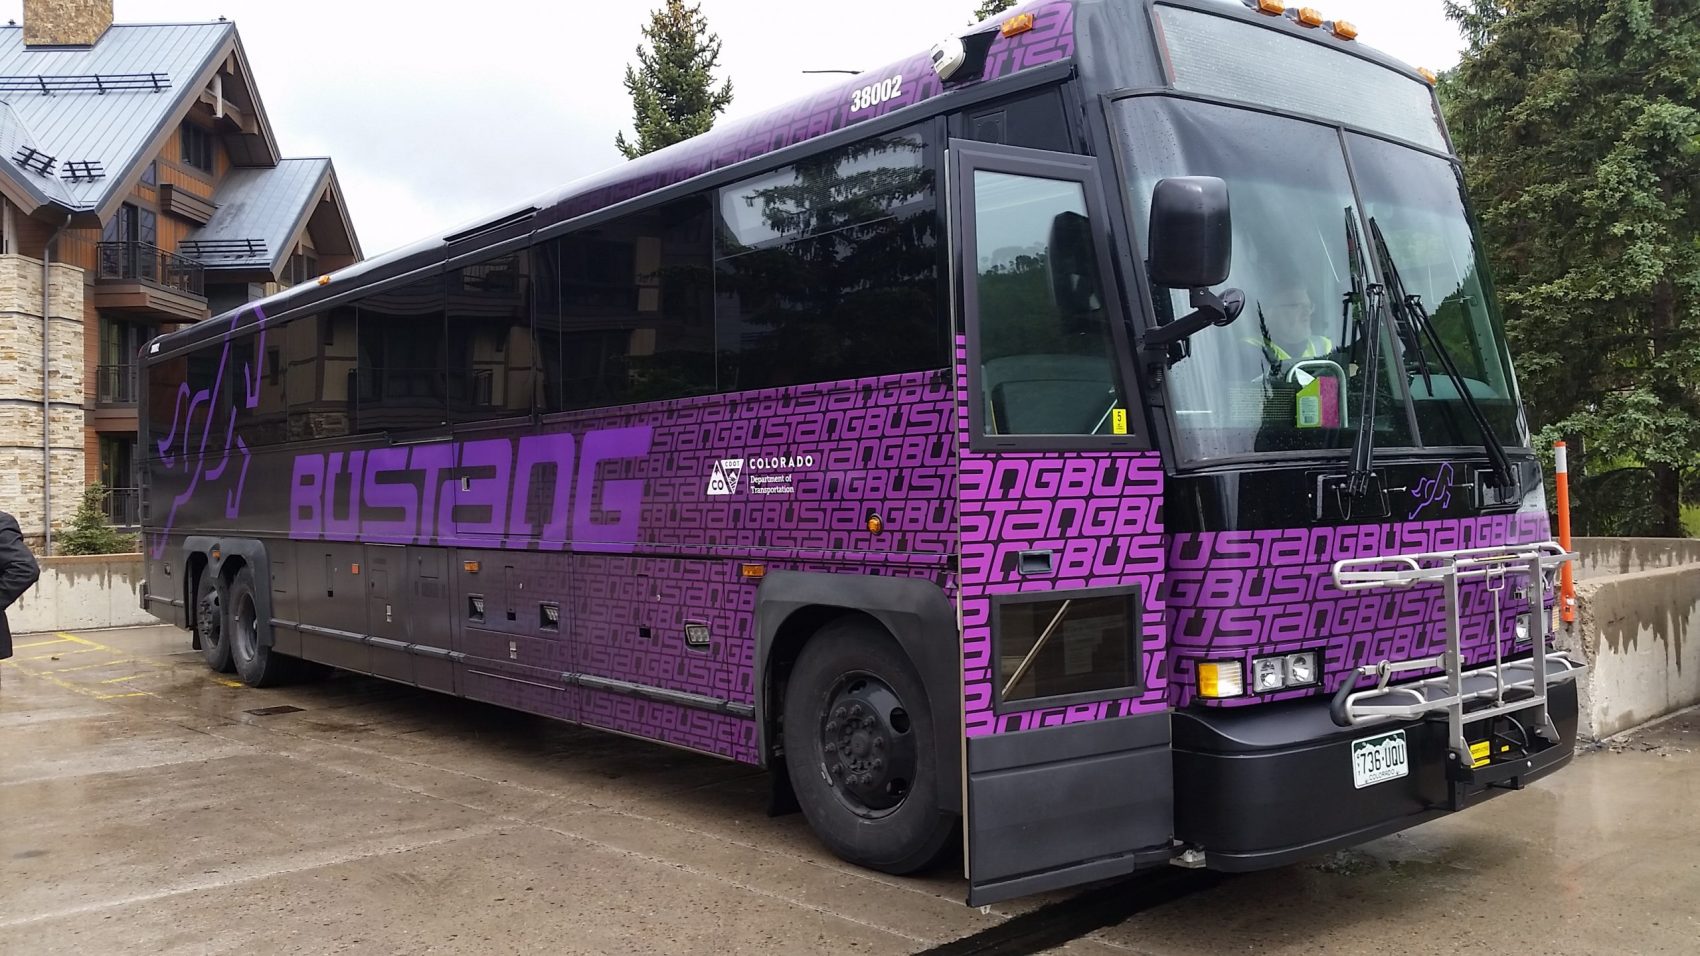 Bustang bus service that runs between Denver and the mountains